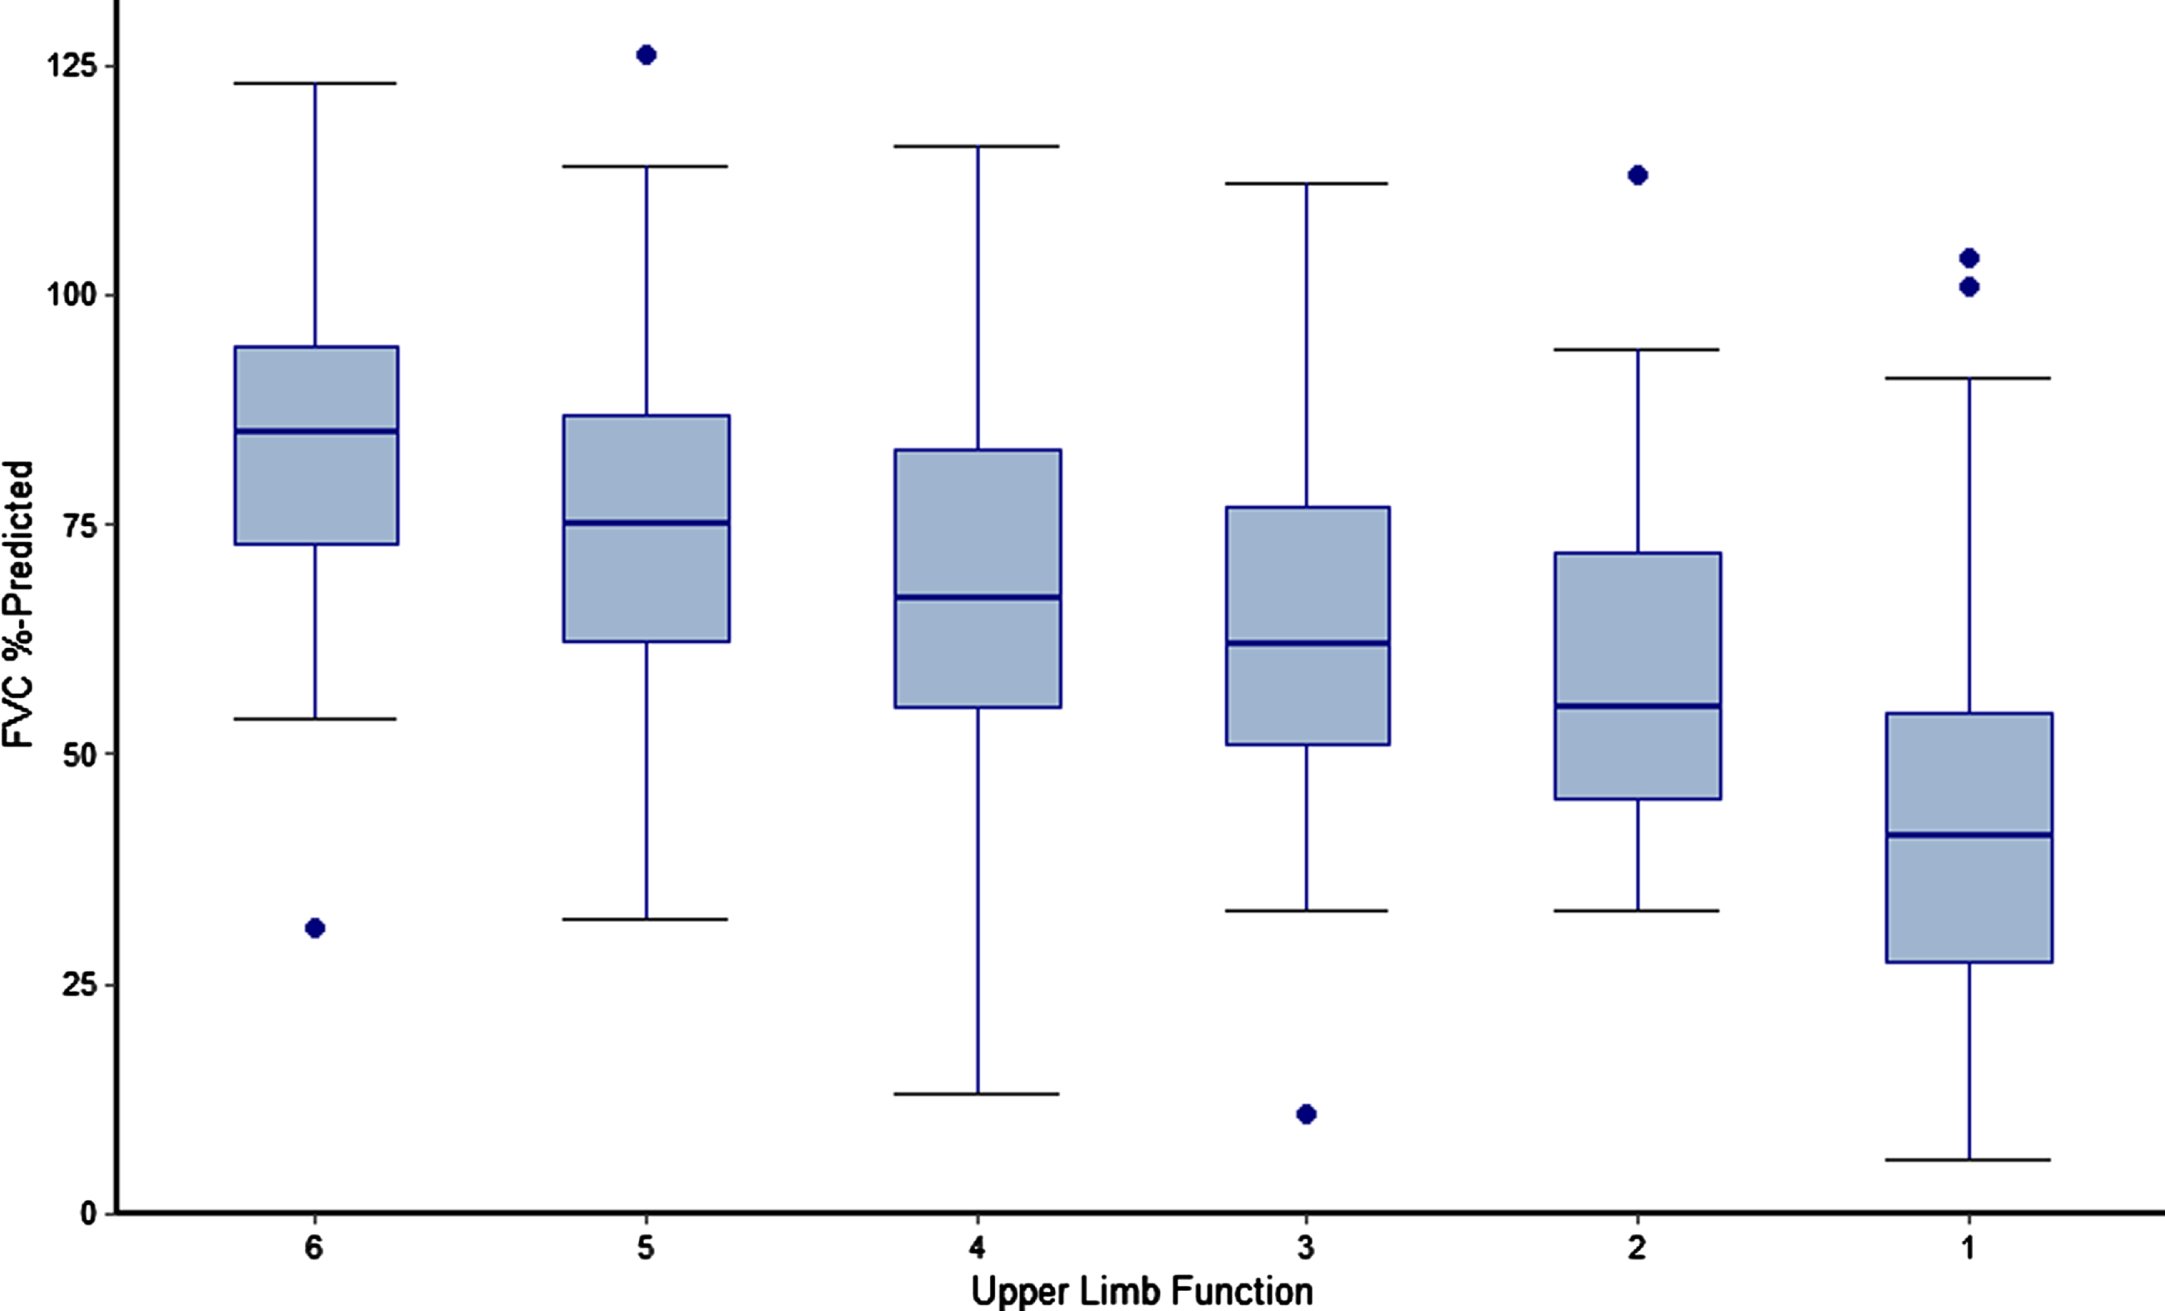 FVC % -predicted by Upper Limb Function among non-ambulatory patients with DMD. Caption: Upper limb function was defined using the entry item to the Performance of Upper Limb Module for DMD 2.0 (lowest value of 0 not observed), which is based on a revised version of the Brooke Scale of Upper Extremity Function. Higher entry item values represent greater functional ability rather than greater functional impairment. Figure includes measurements of FVC % -predicted and PUL from all visits for sample patients, including visits while ambulatory for those patients who lost ambulation over the course of the PRO-DMD-01 study. Four follow-up measurements of FVC % -predicted among 3 patients were deemed to be extreme outliers and excluded from analysis. Dots represent outliers. Abbreviations: DMD, Duchenne muscular dystrophy; FVC, forced vital capacity.